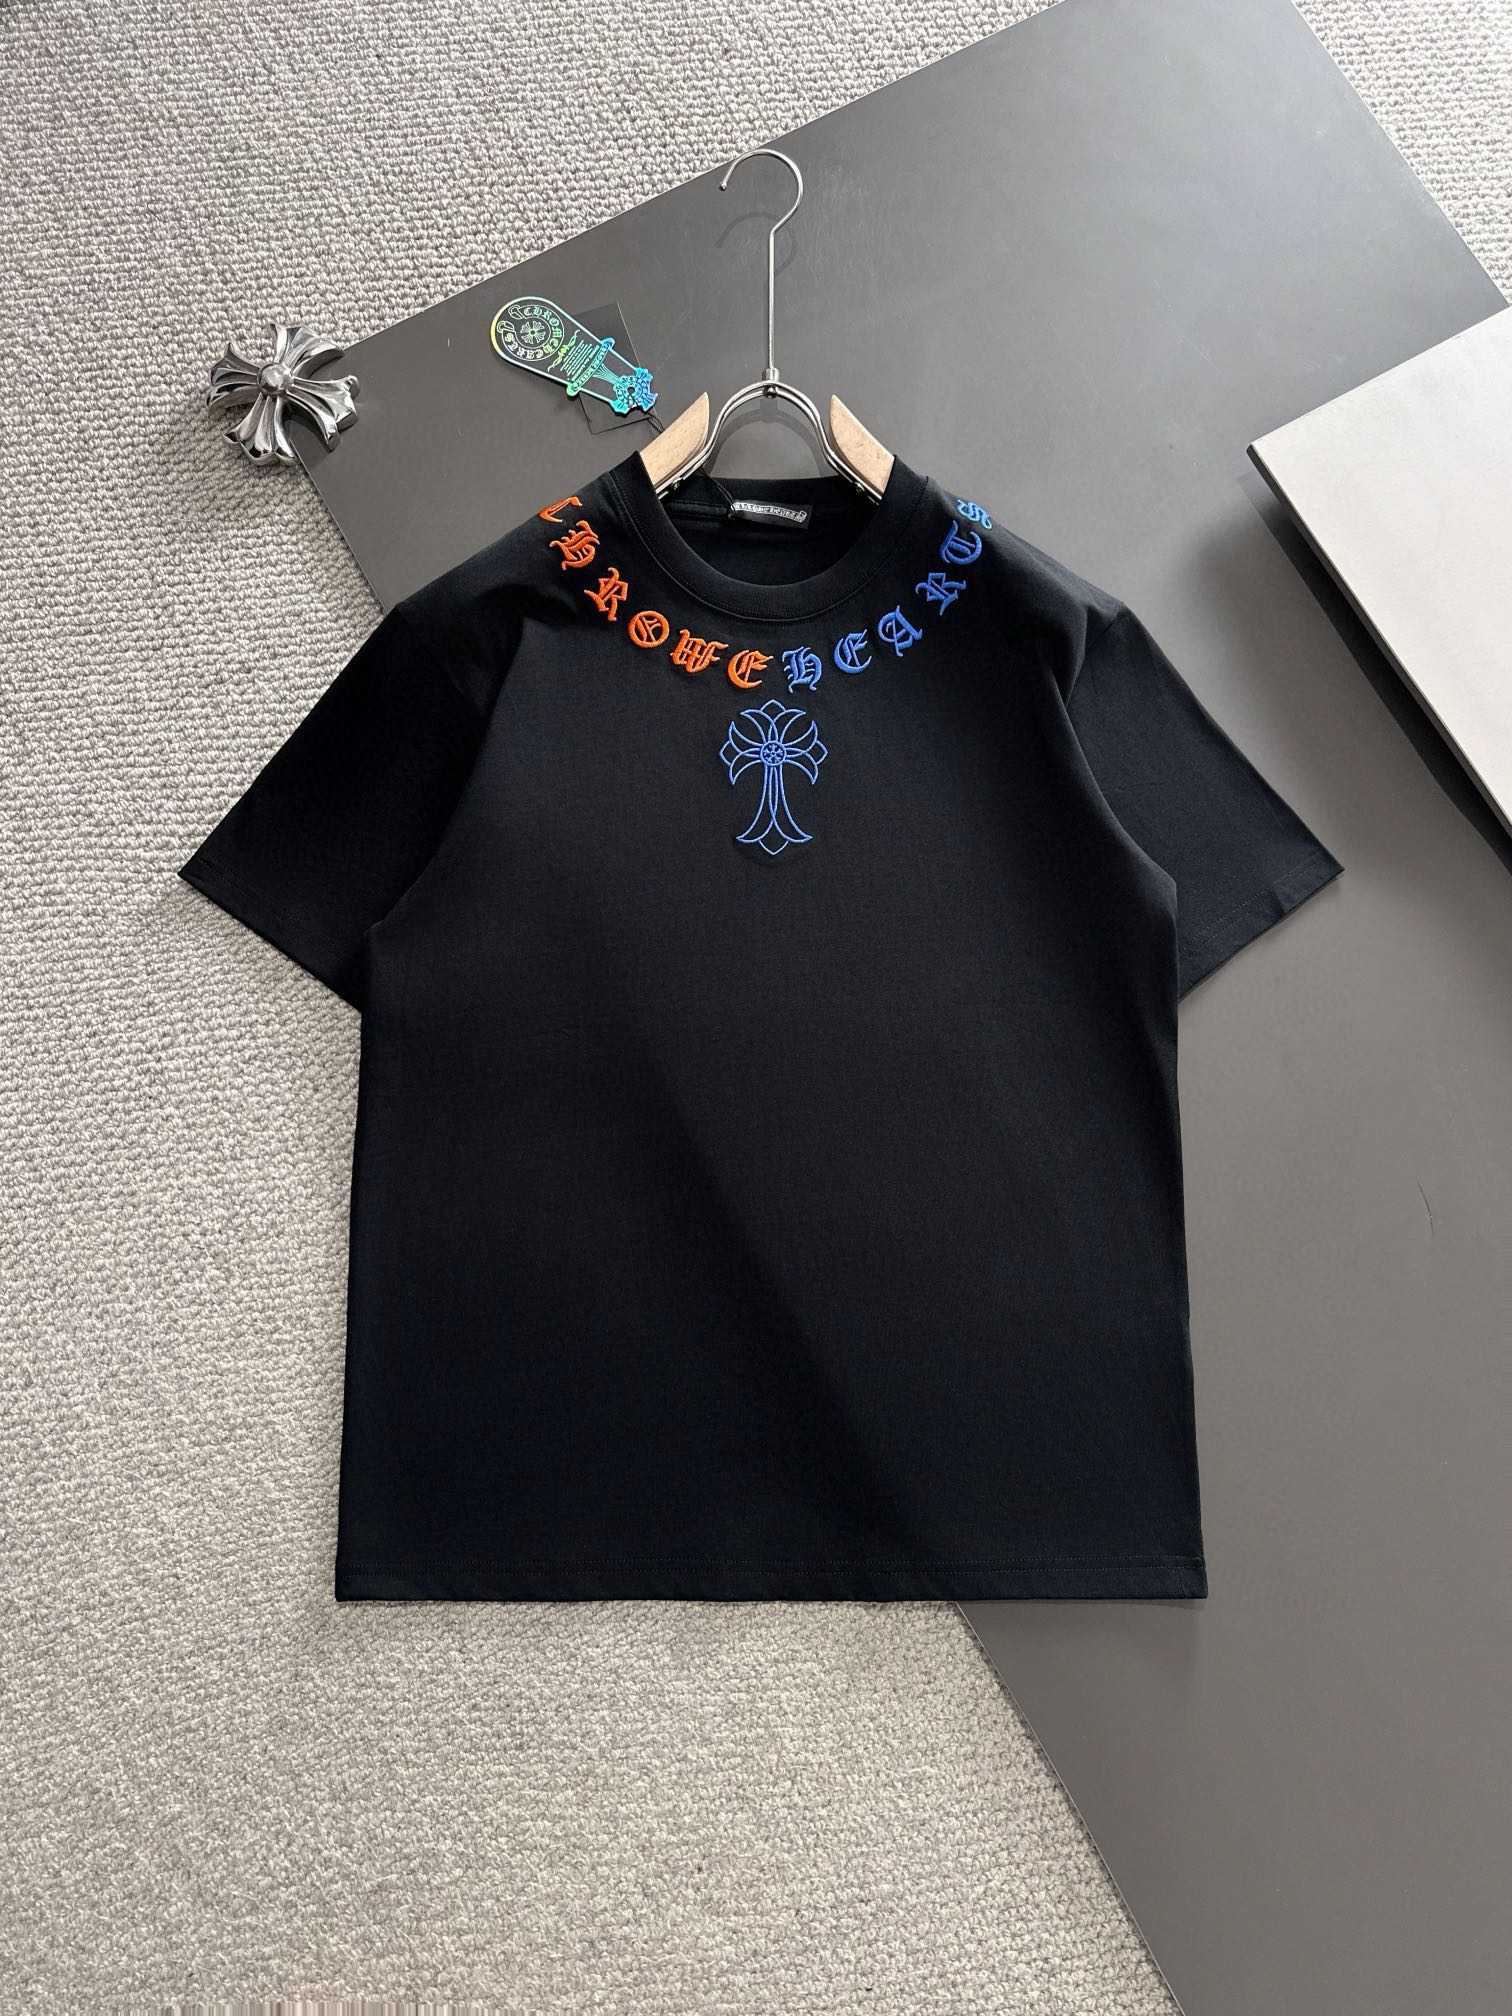 Chrome Hearts Clothing T-Shirt Black White Embroidery Unisex Spring Collection Short Sleeve